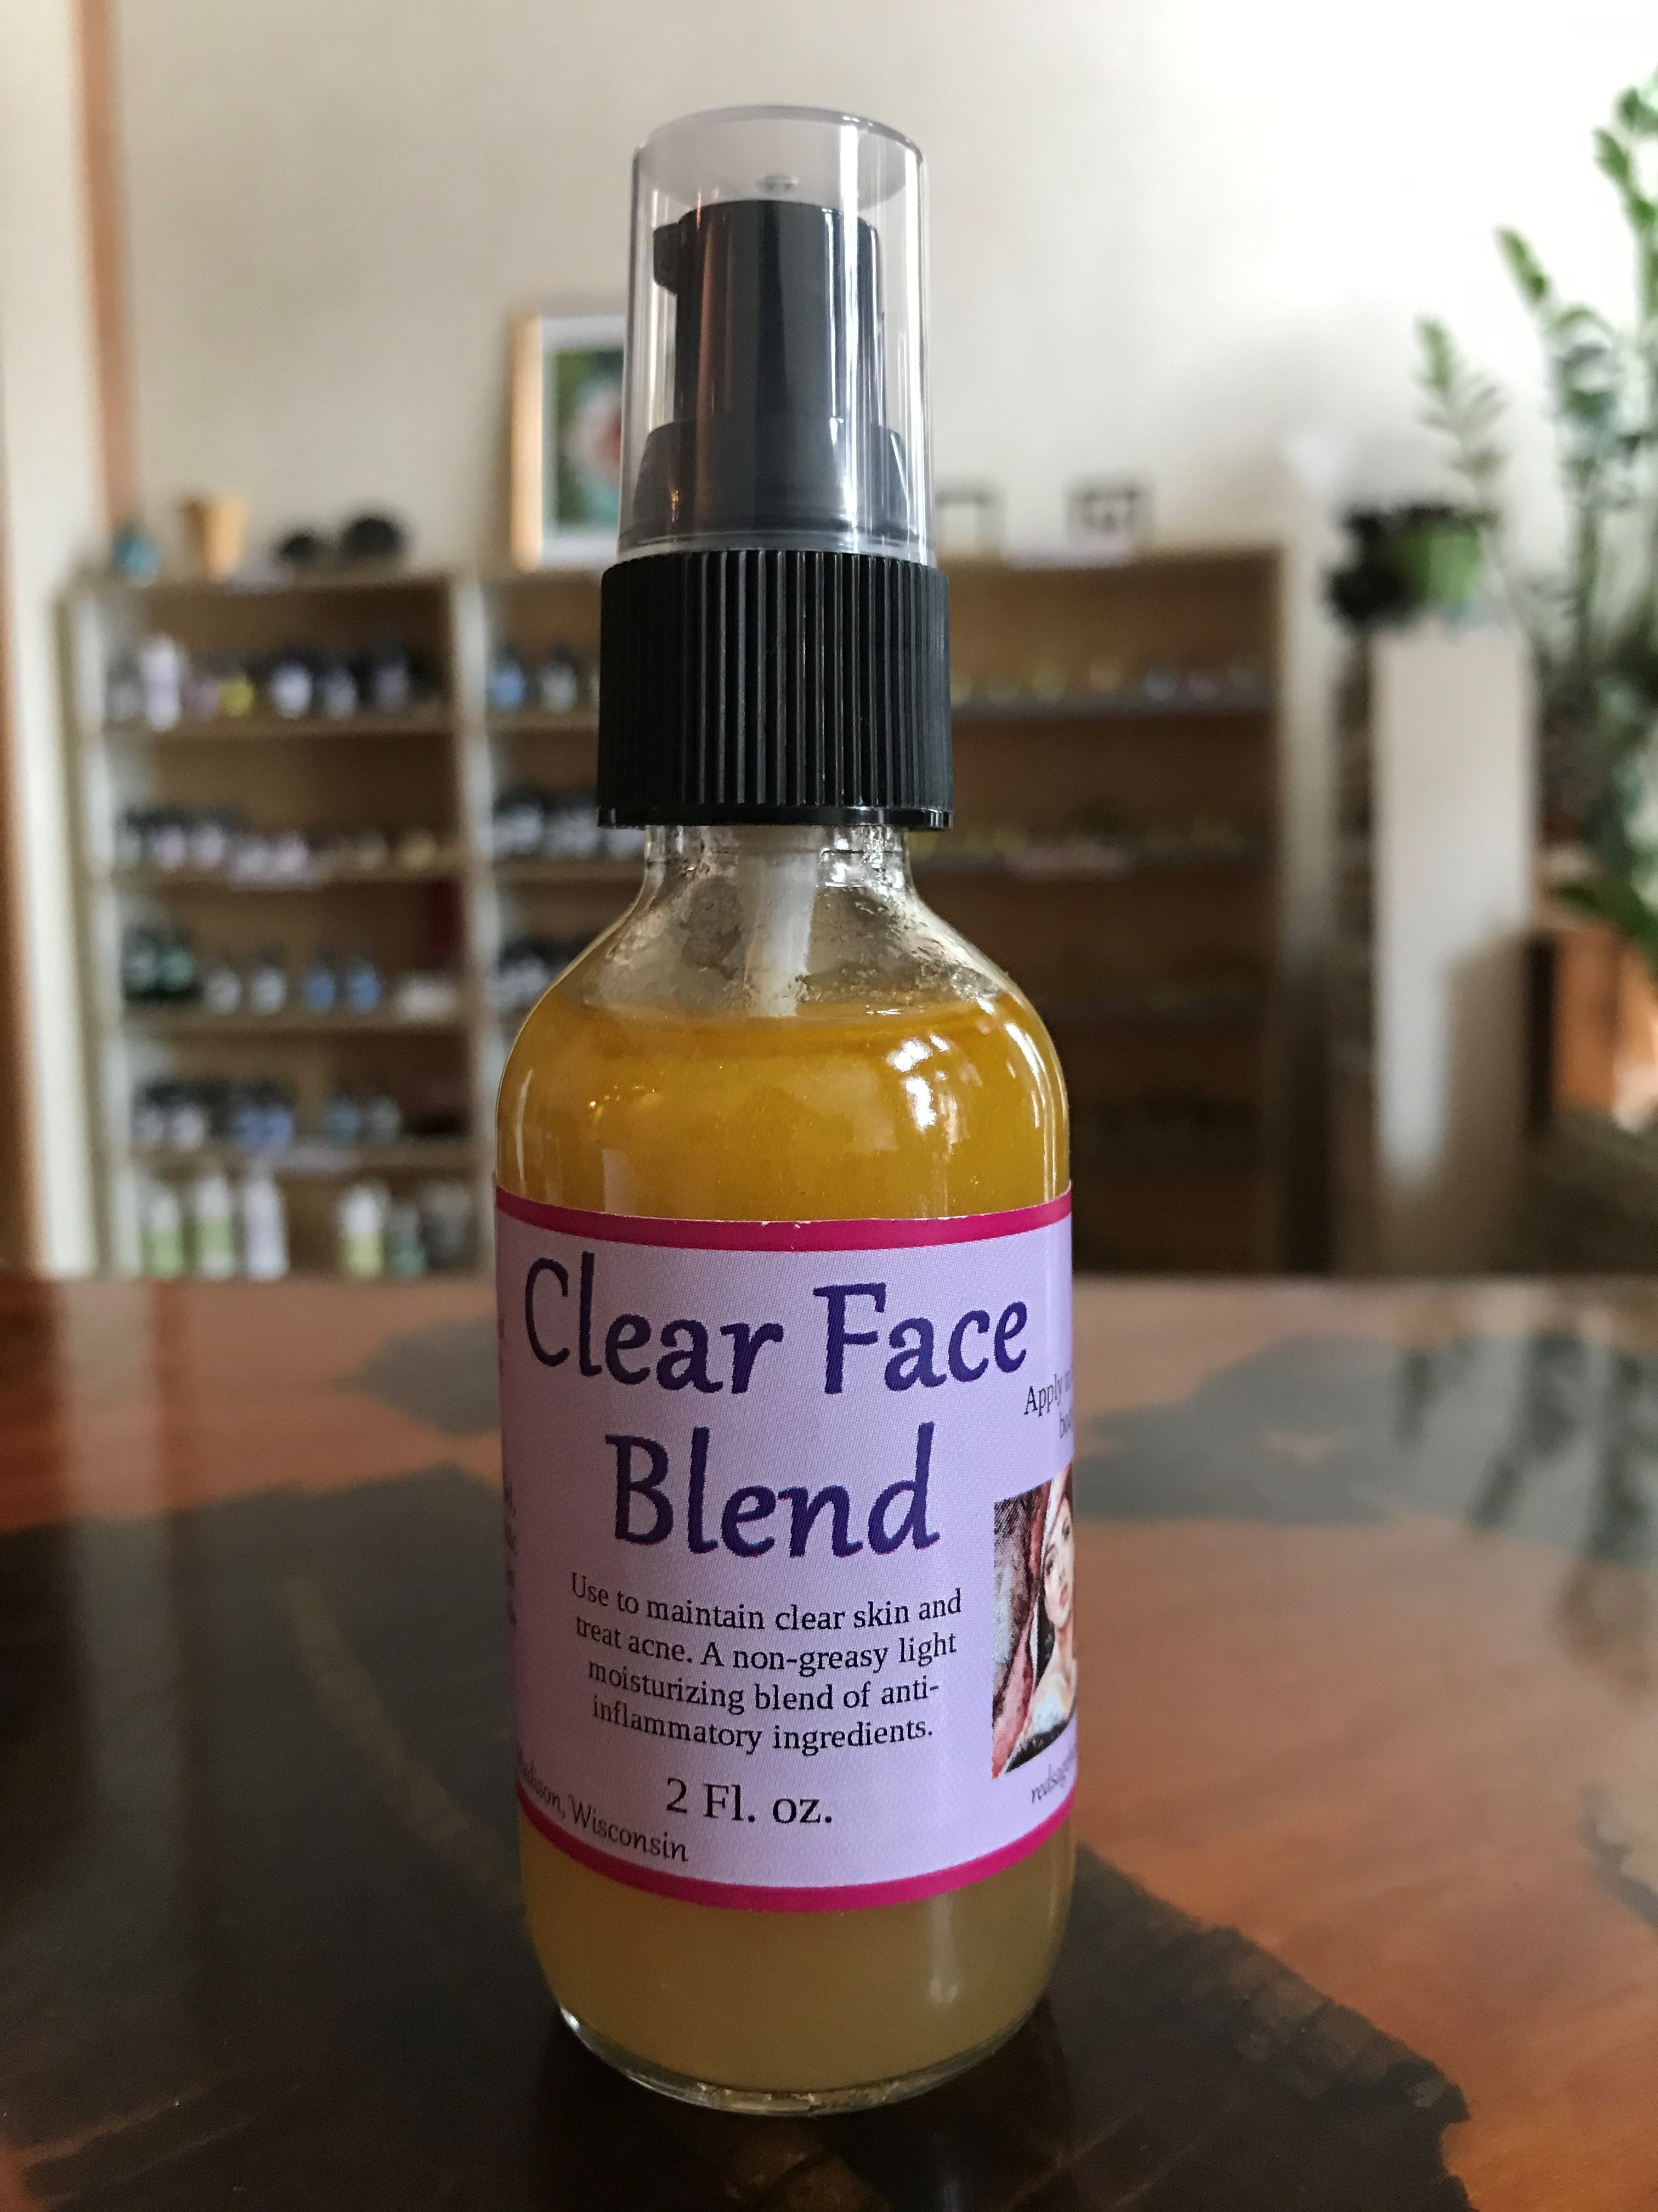 Clear Face Blend